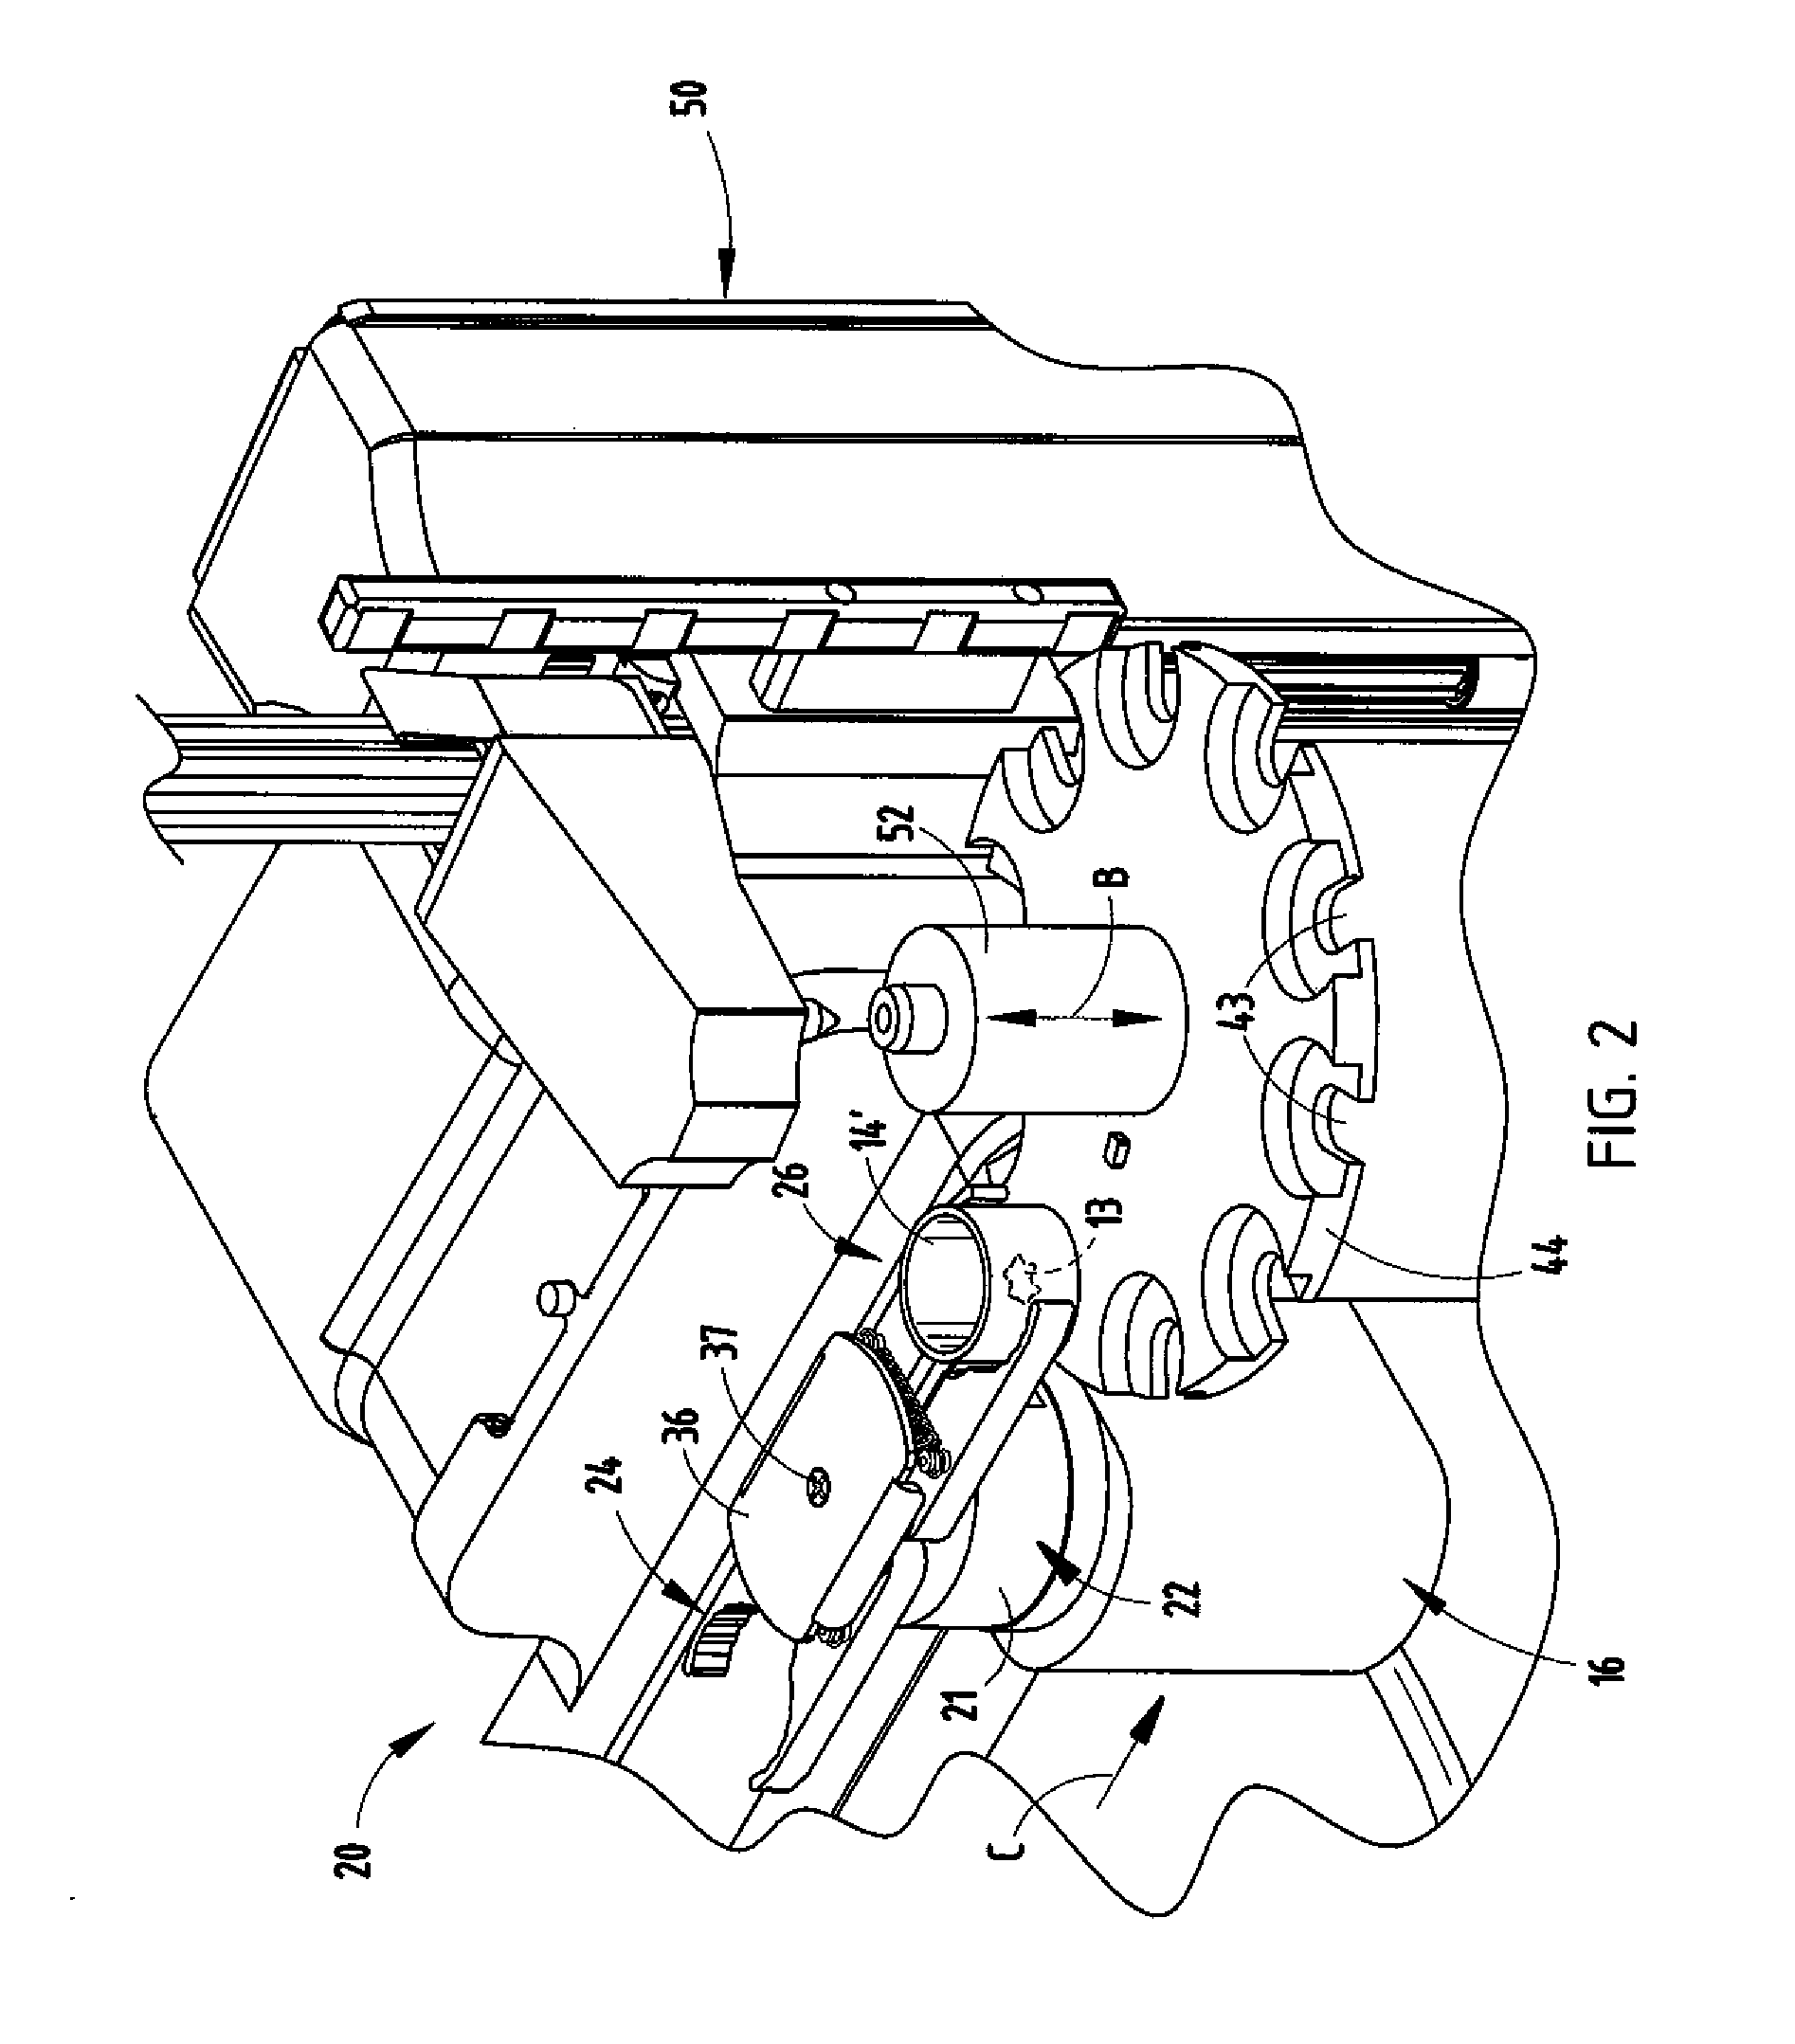 Crucible shuttle assembly and method of operation